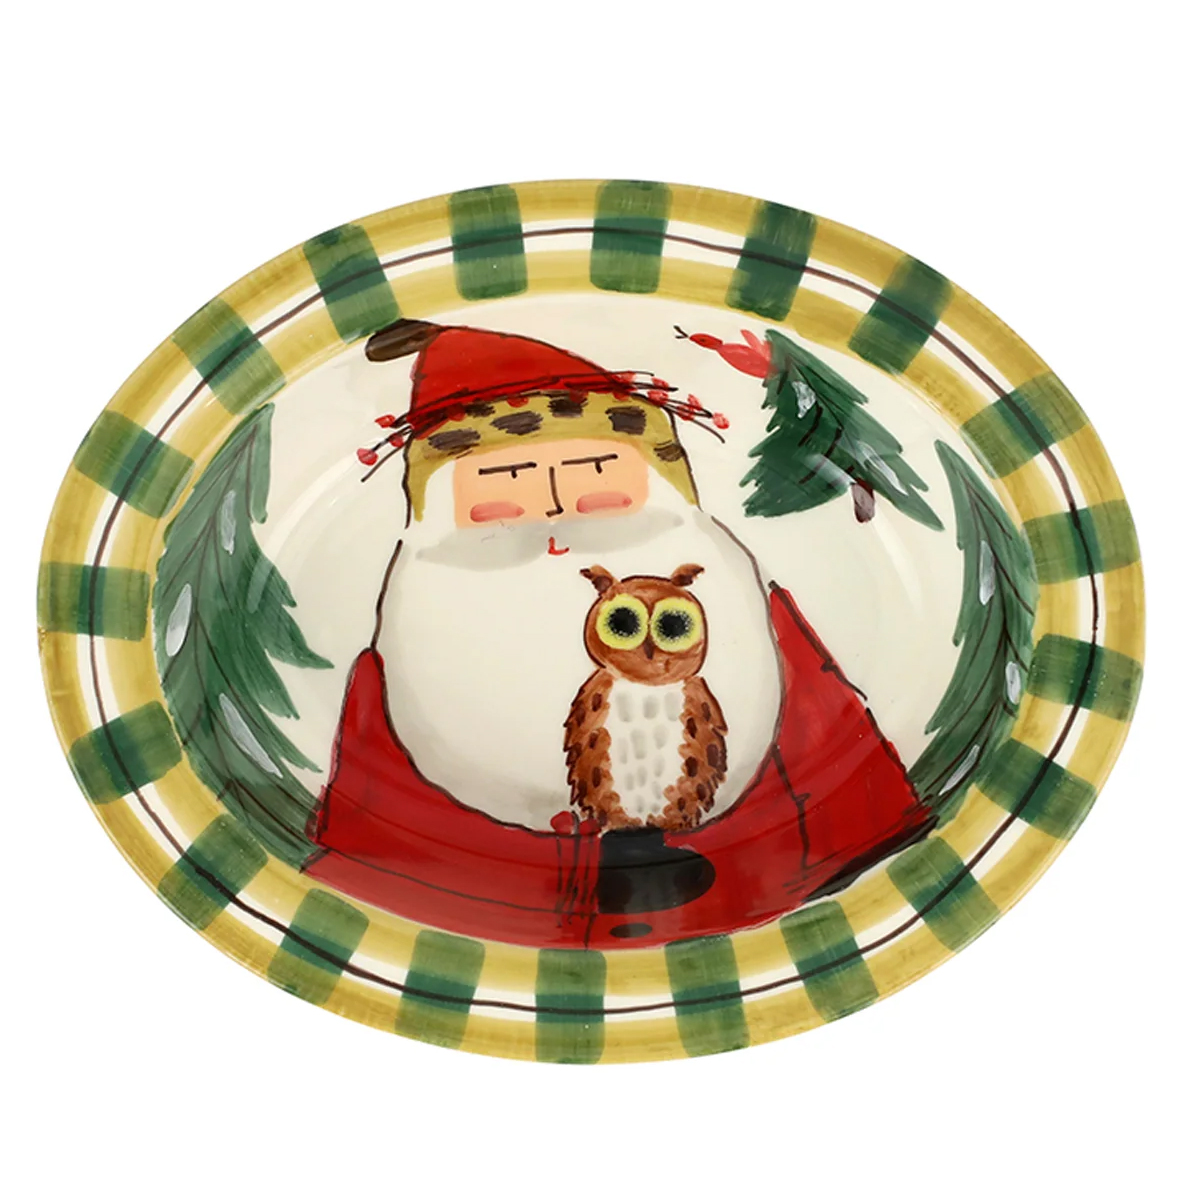 Vietri - Old Saint Nick Small Rimmed Oval Bowl with Owl